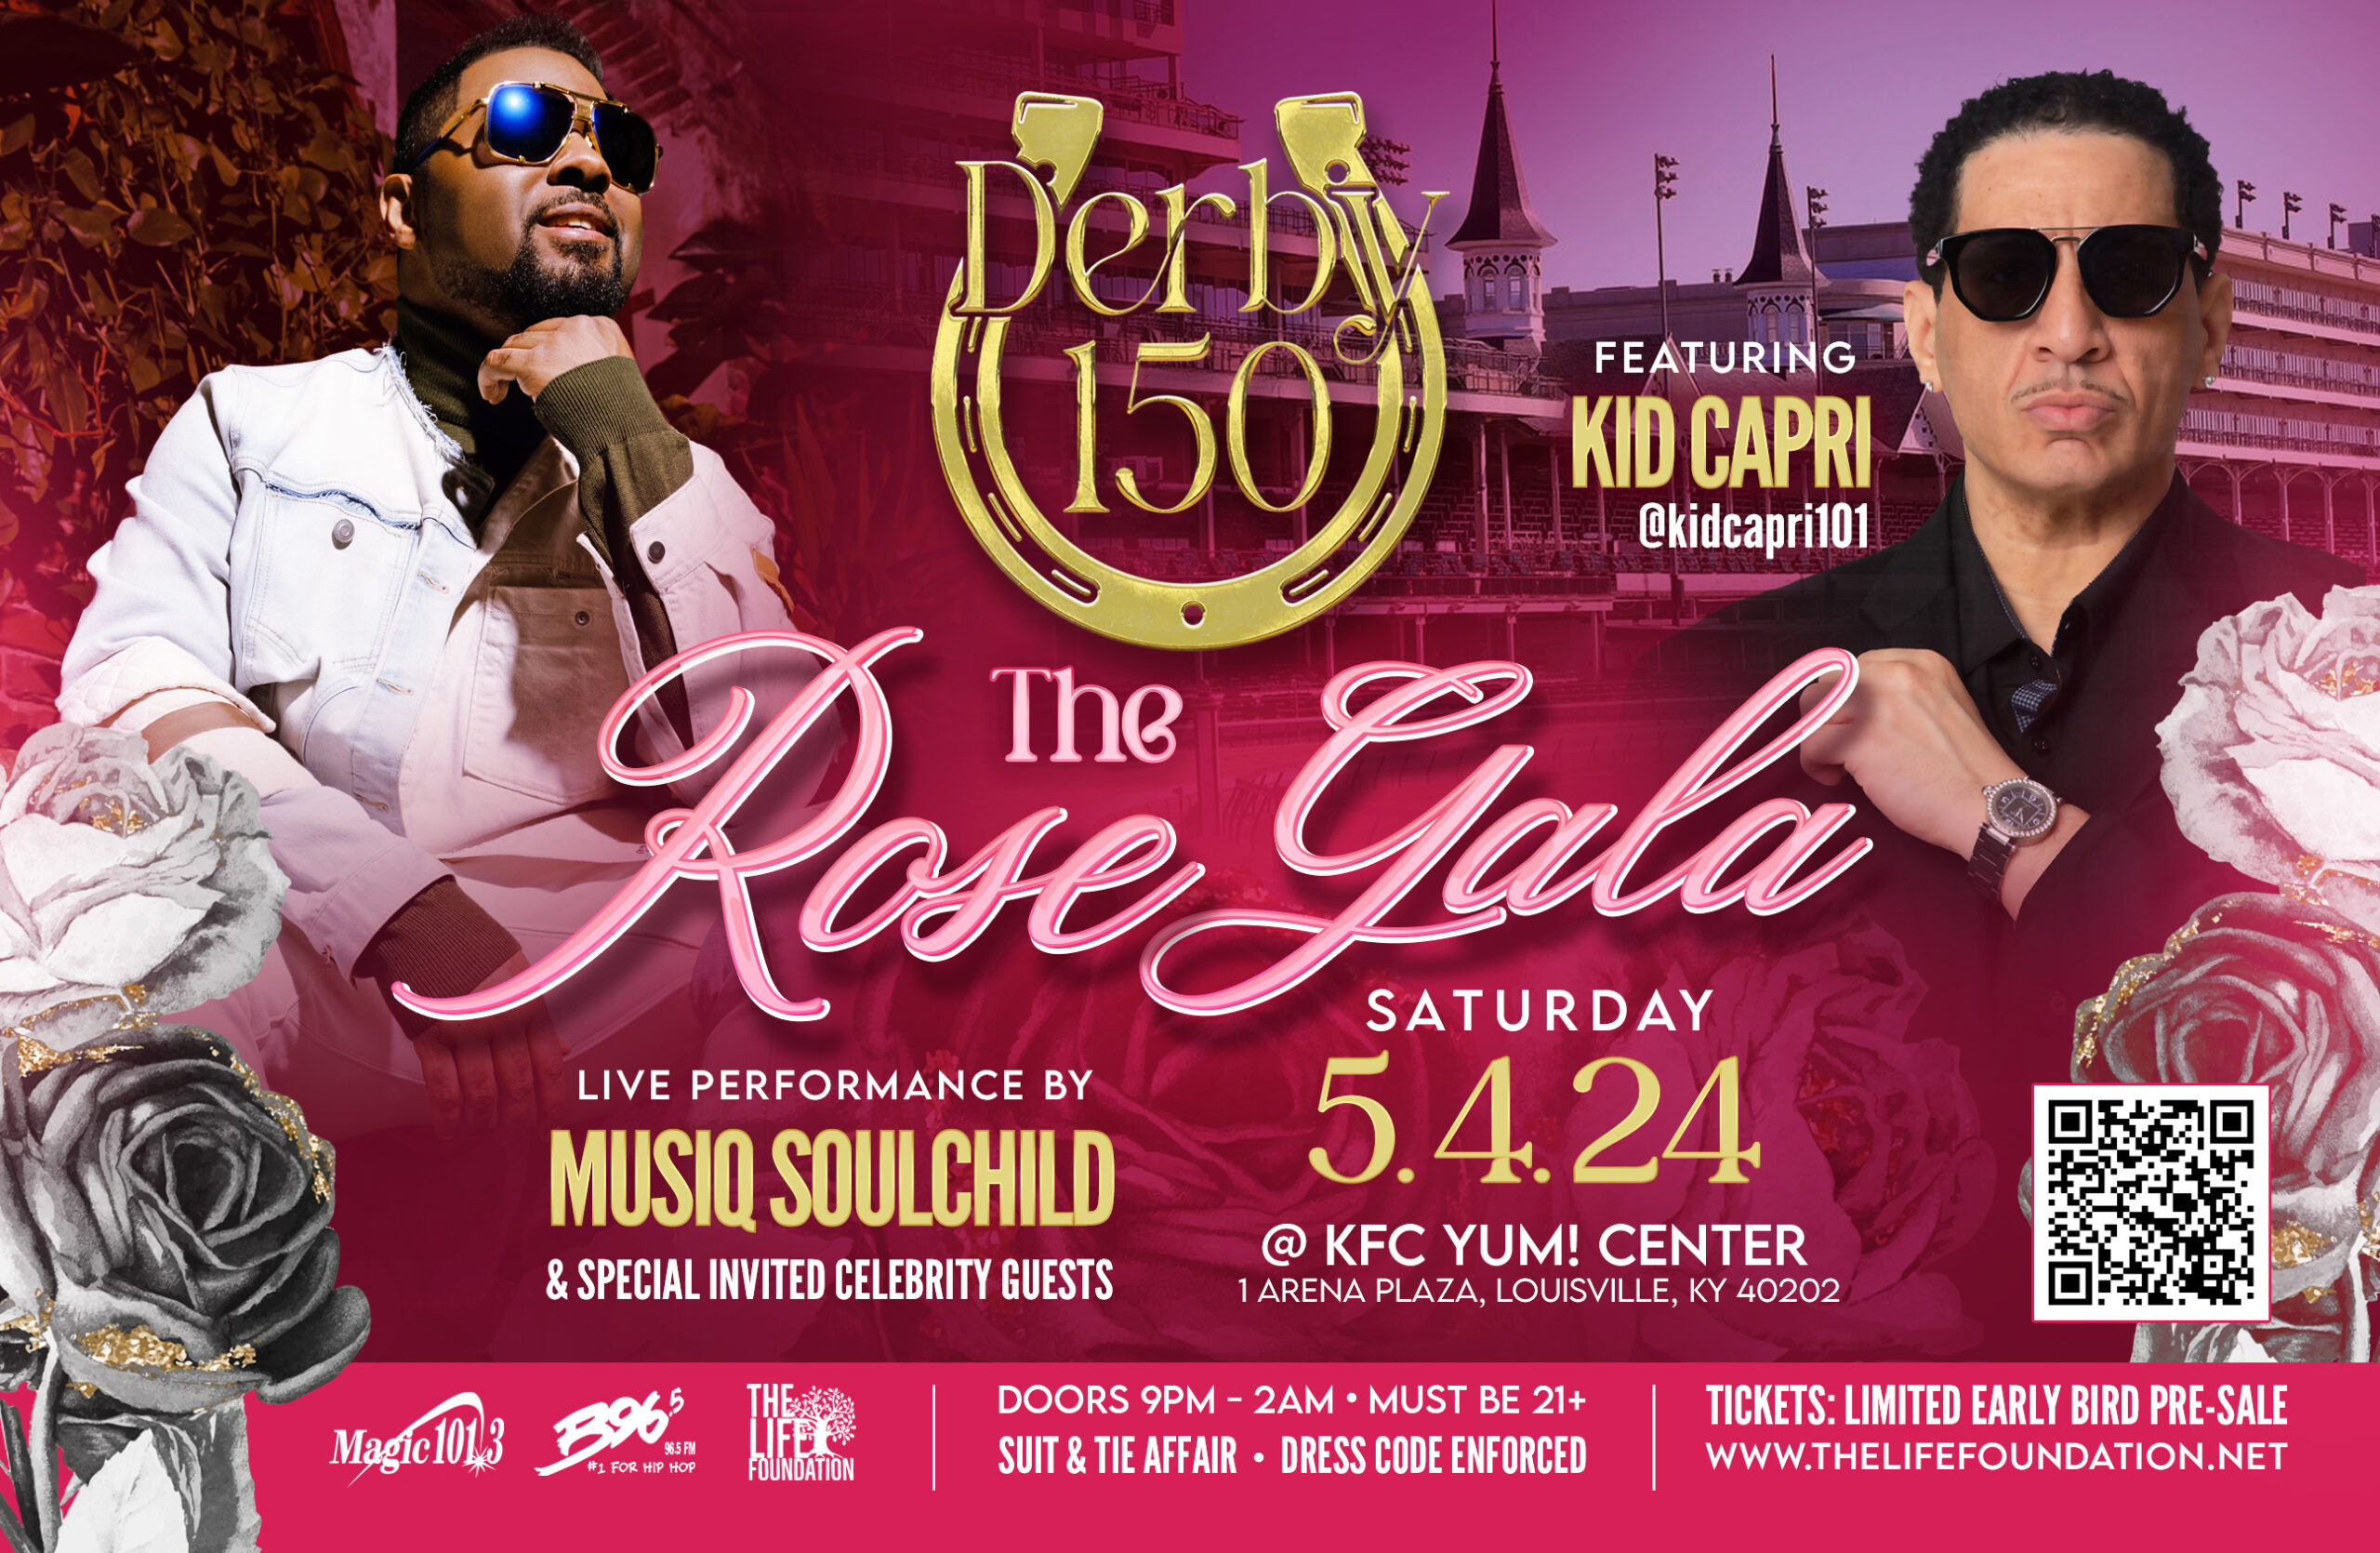 <h1 class="tribe-events-single-event-title">Magic 101.3 Presents the Derby 150 Rose Gala</h1>